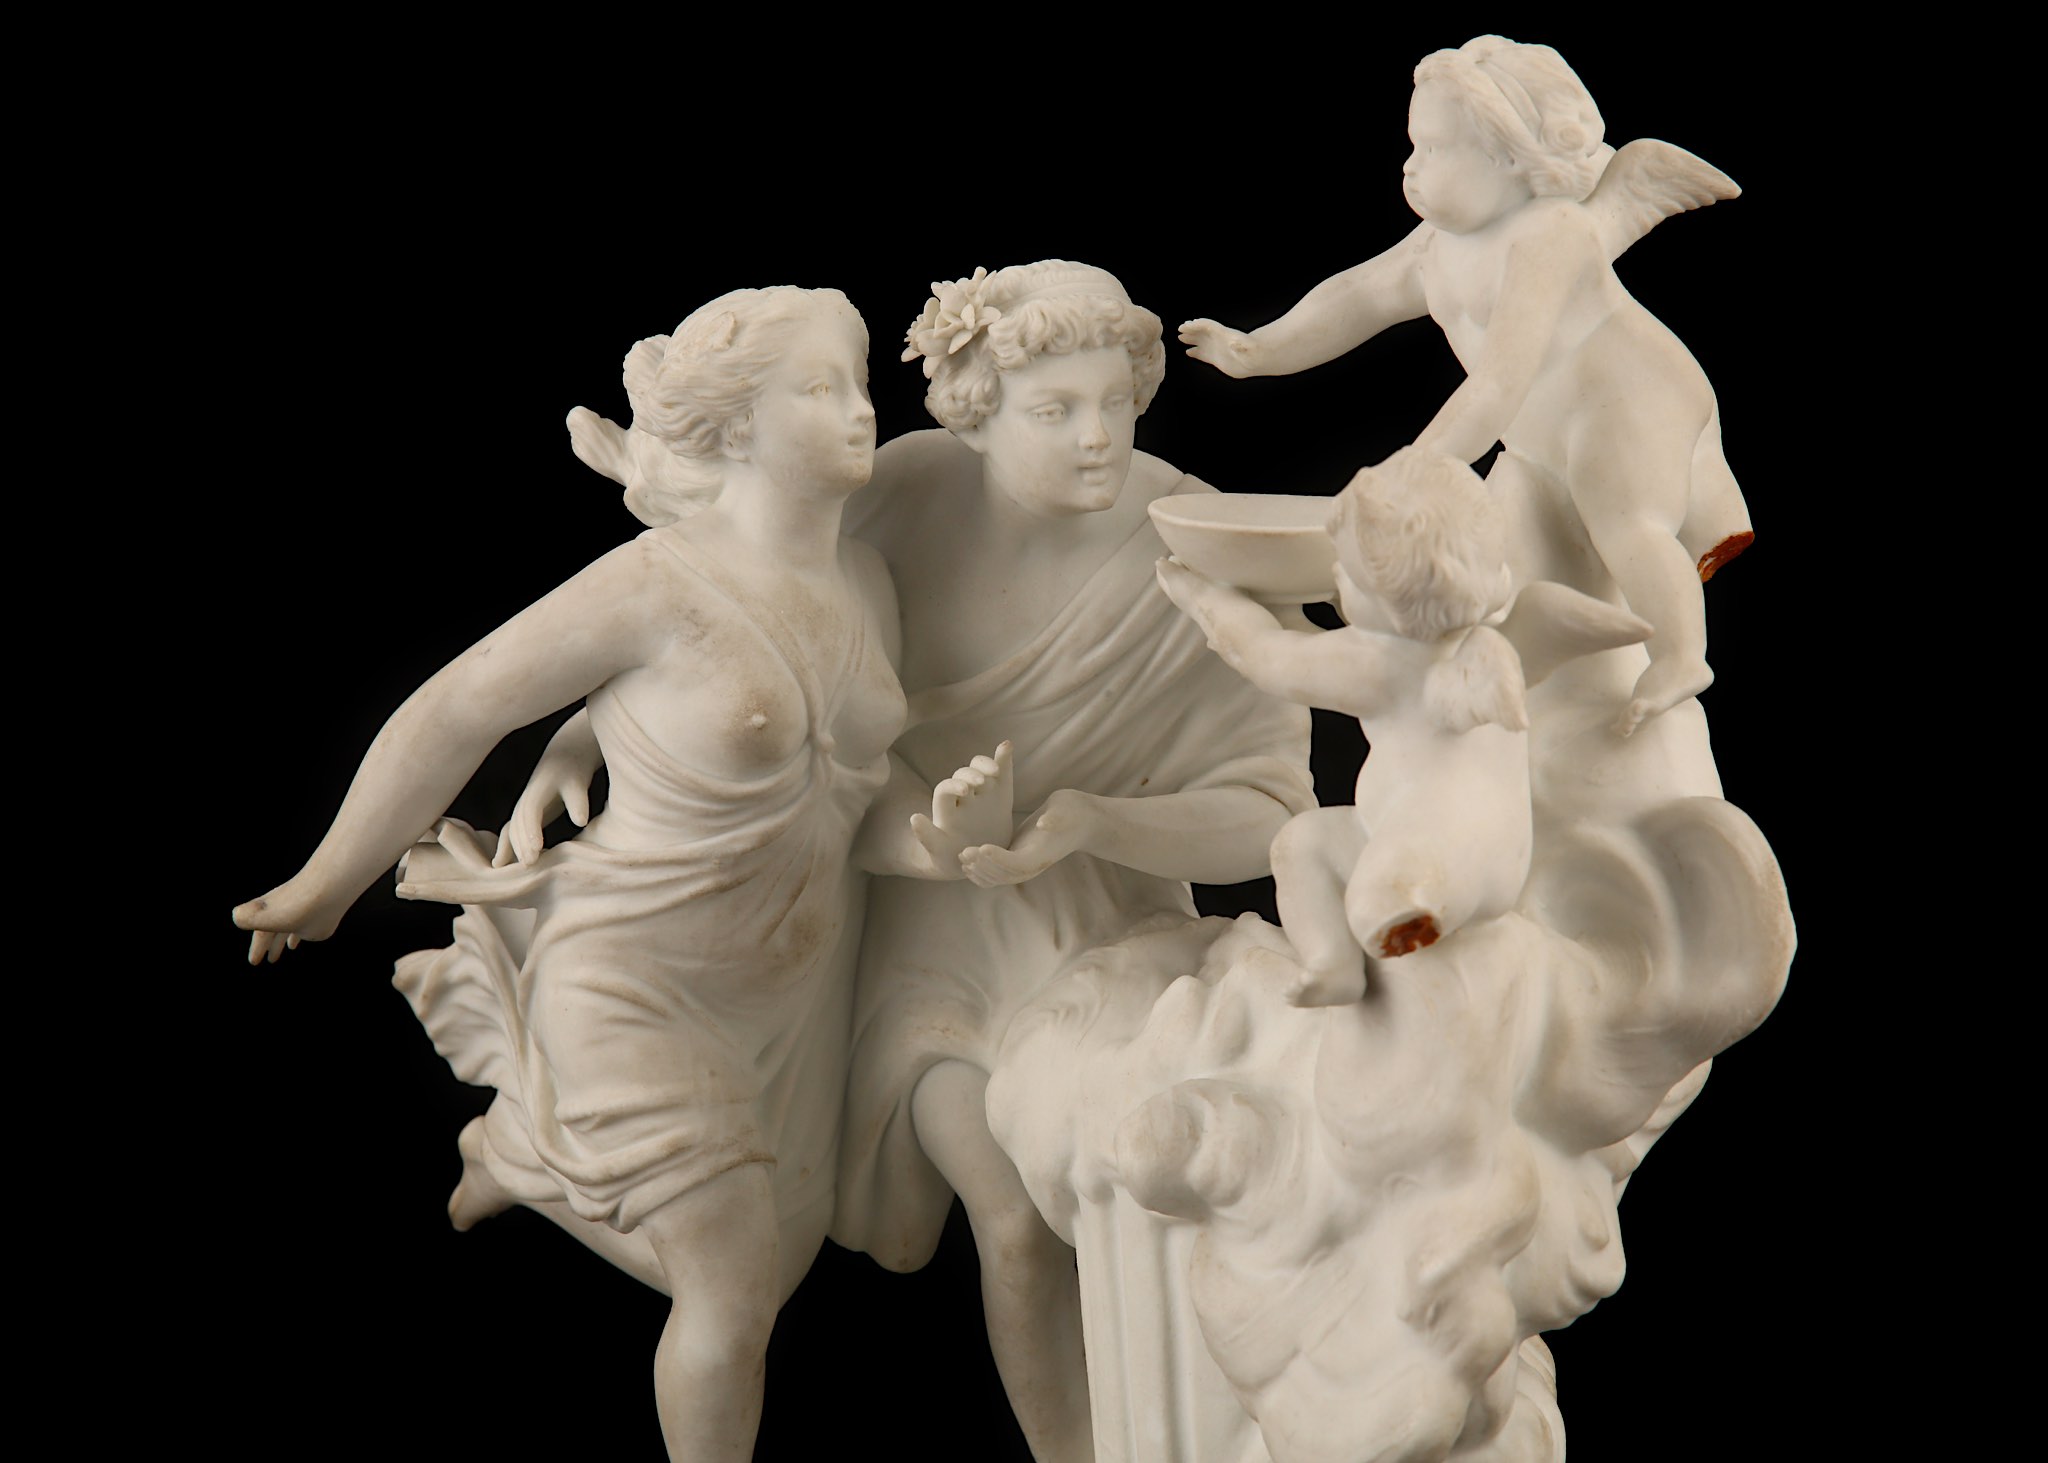 A SEVRES STYLE BISQUE PORCELAIN FIGURE GROUP OF 'THE FOUNTAIN OF LOVE', 19th century, after Jean- - Image 3 of 5